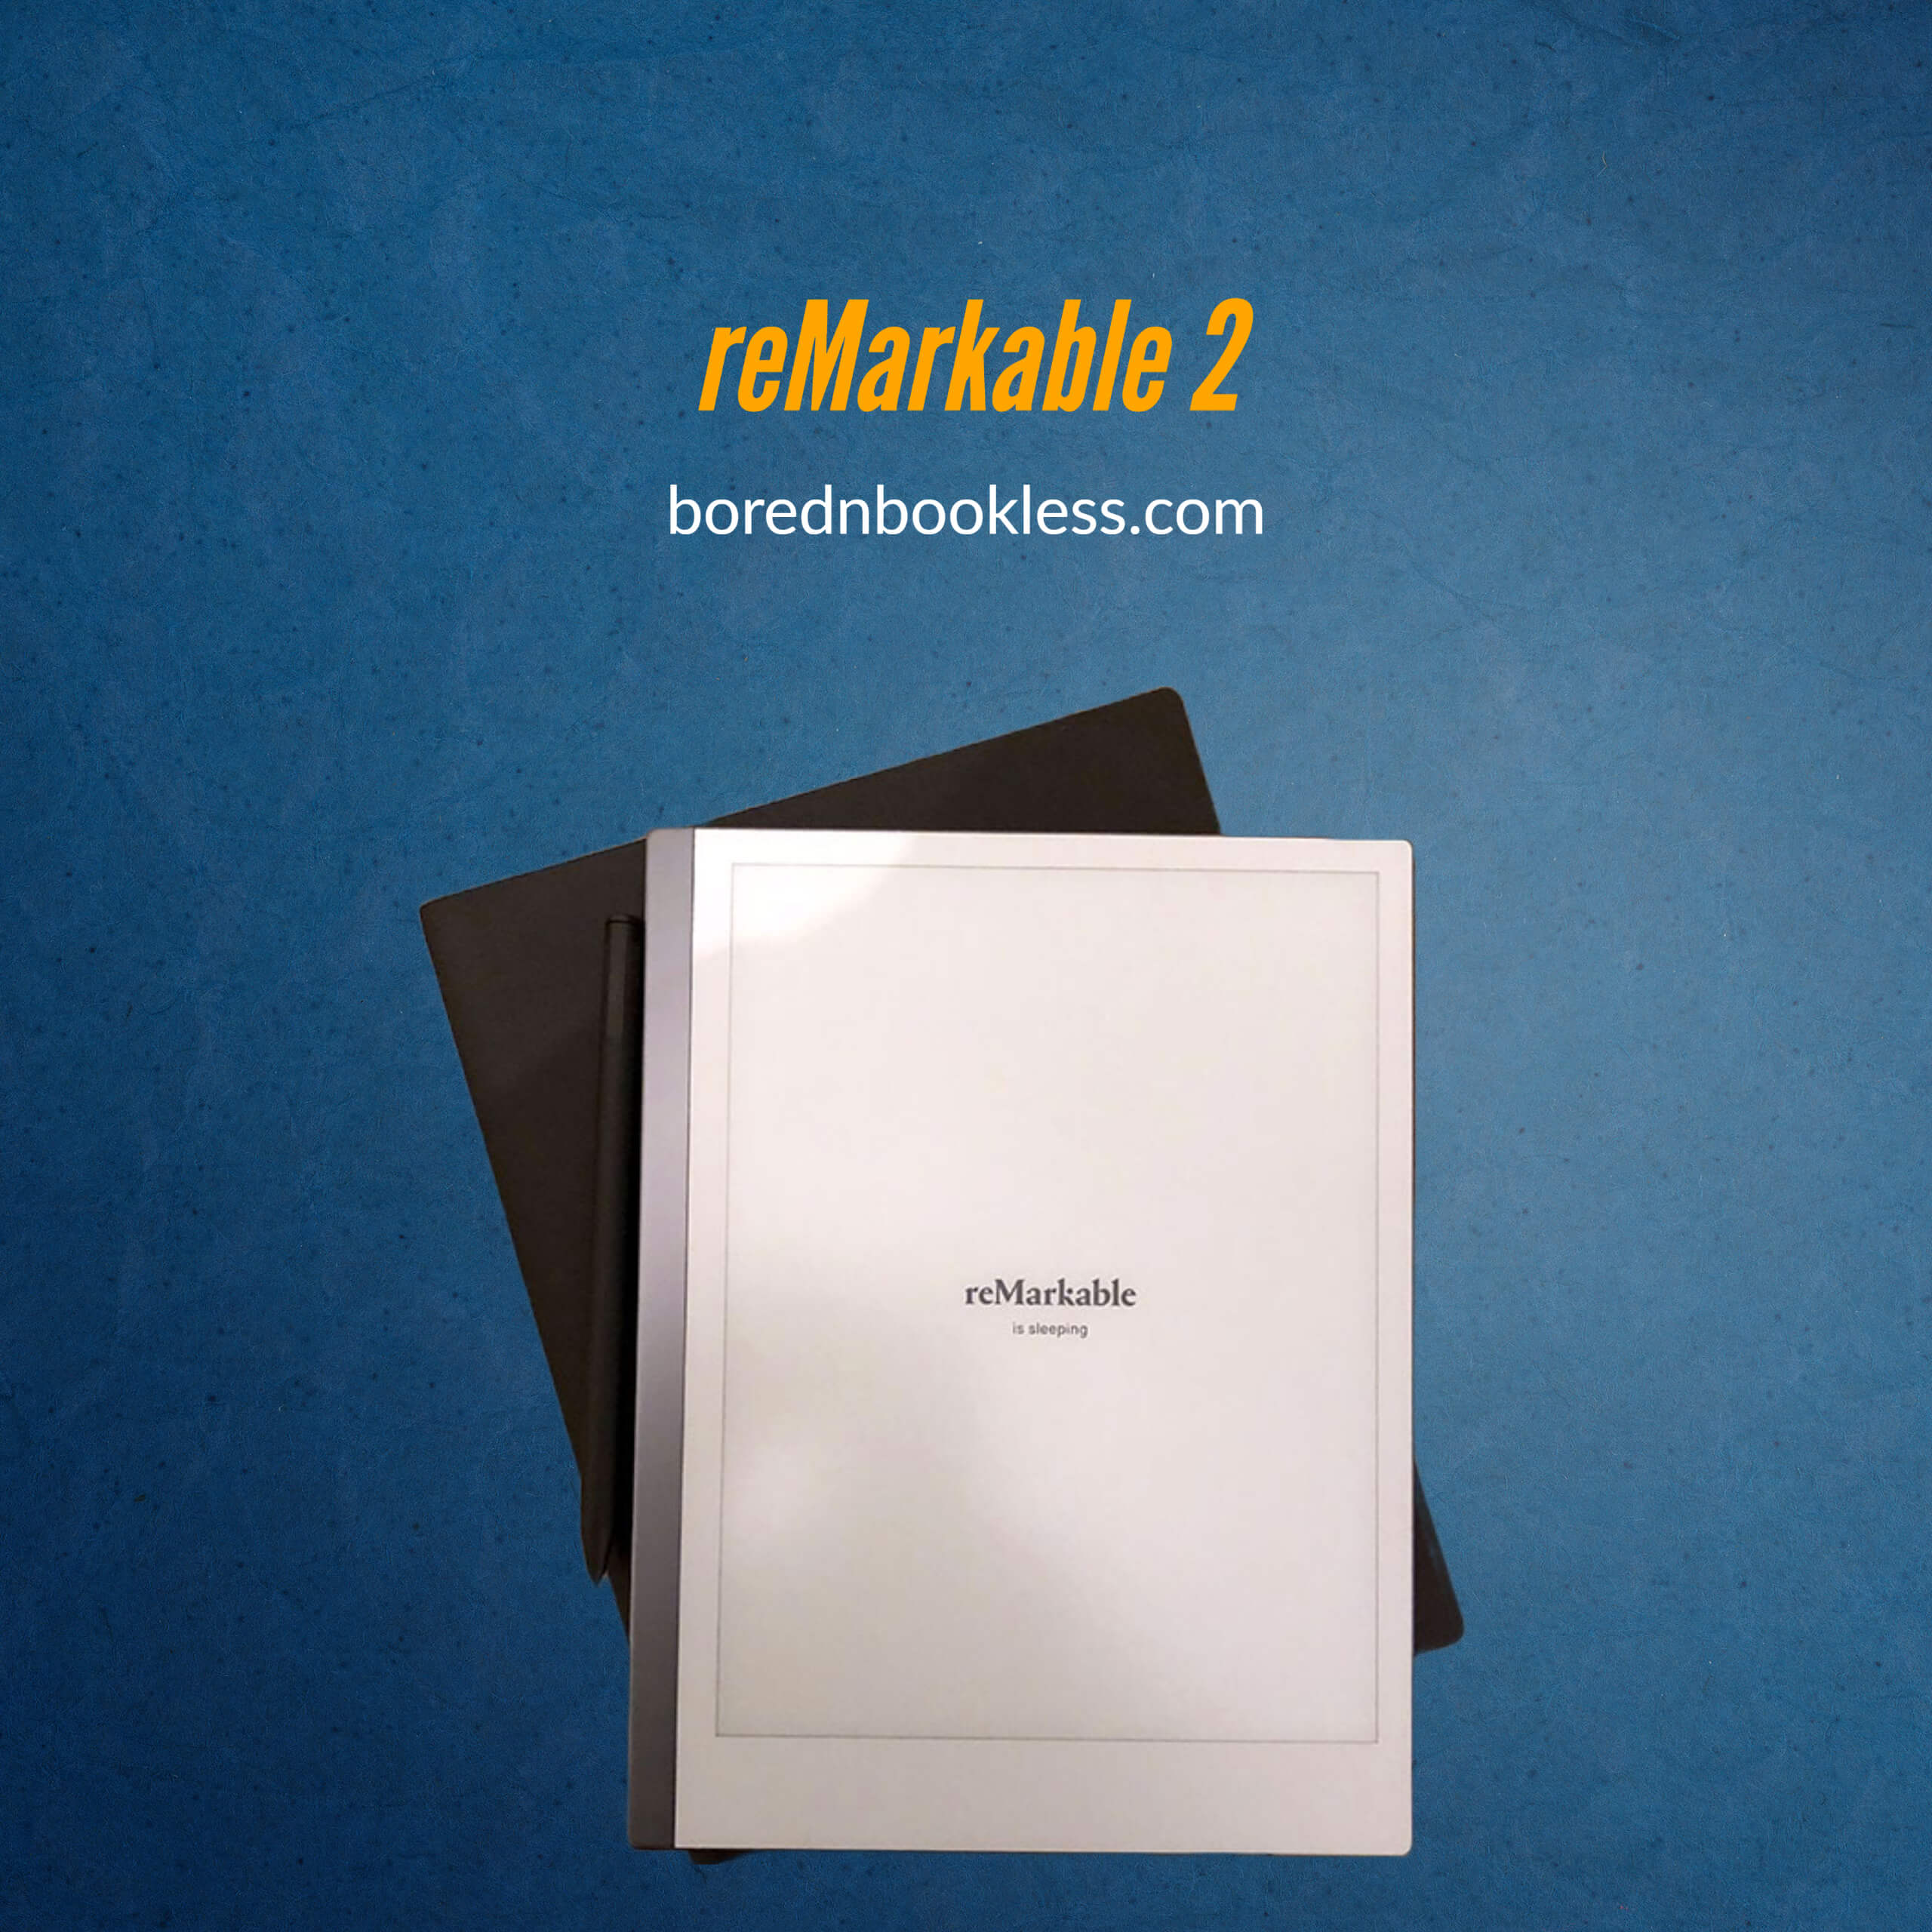 Is reMarkable 3 Coming Out? Rumors & Truth BorednBookless